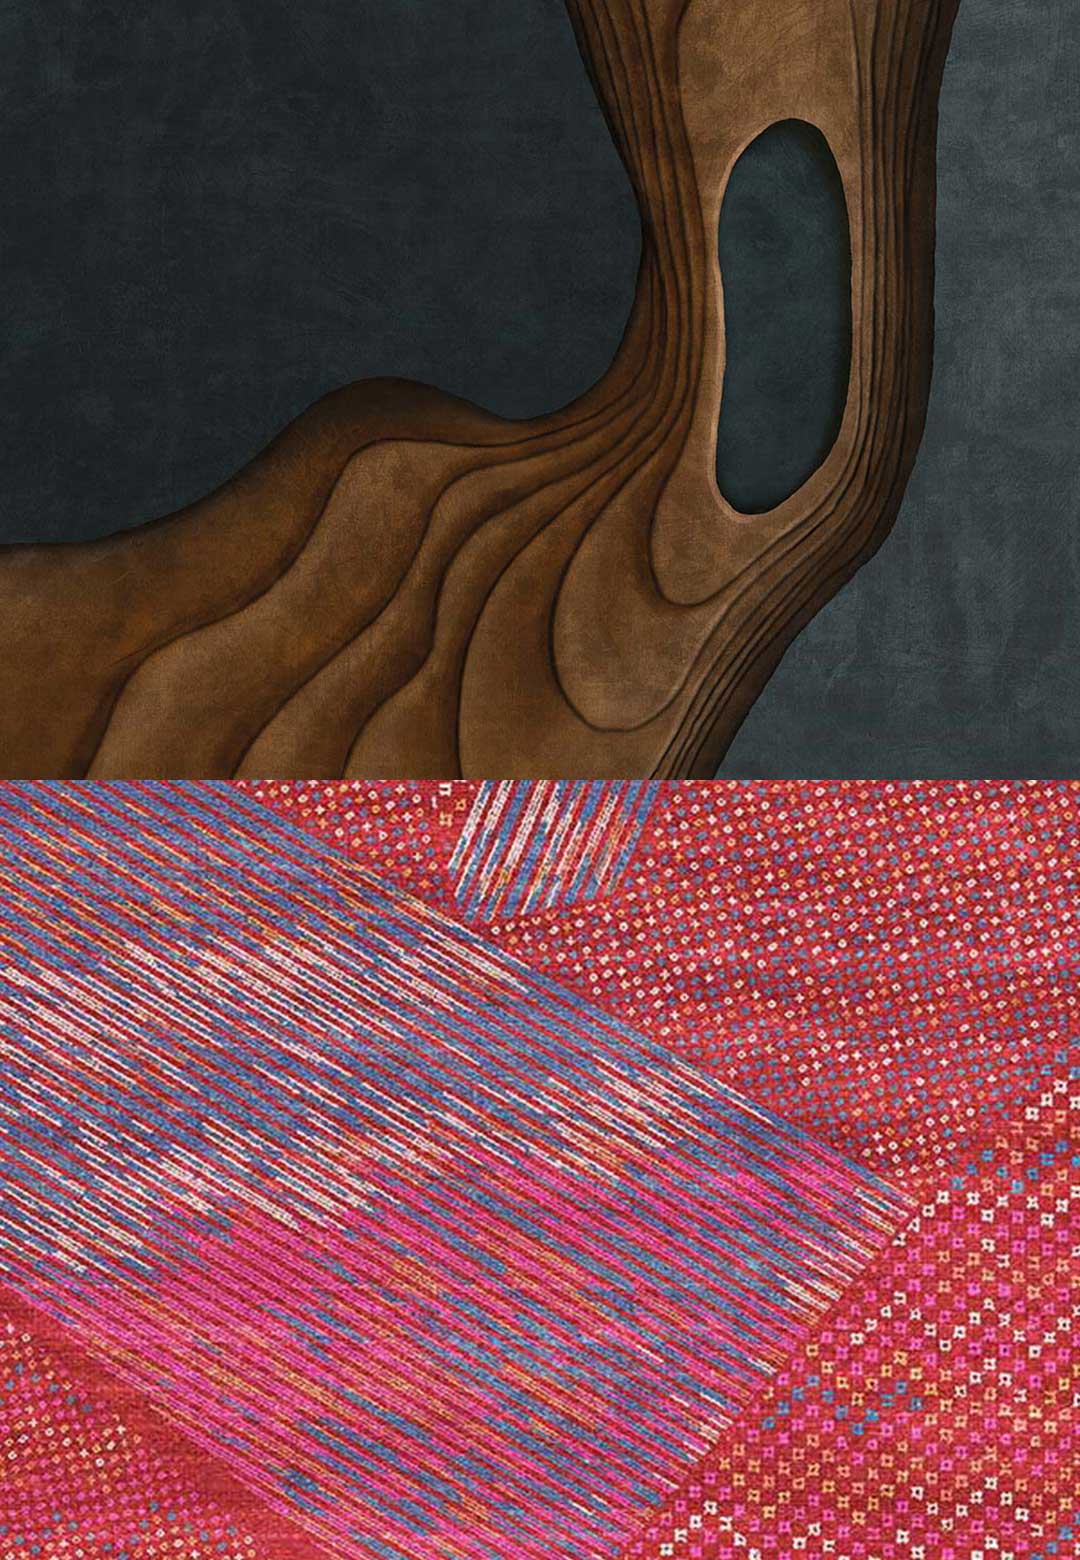 Japanese weave to Ghazni wool: seven rugs for living room that render material tactility